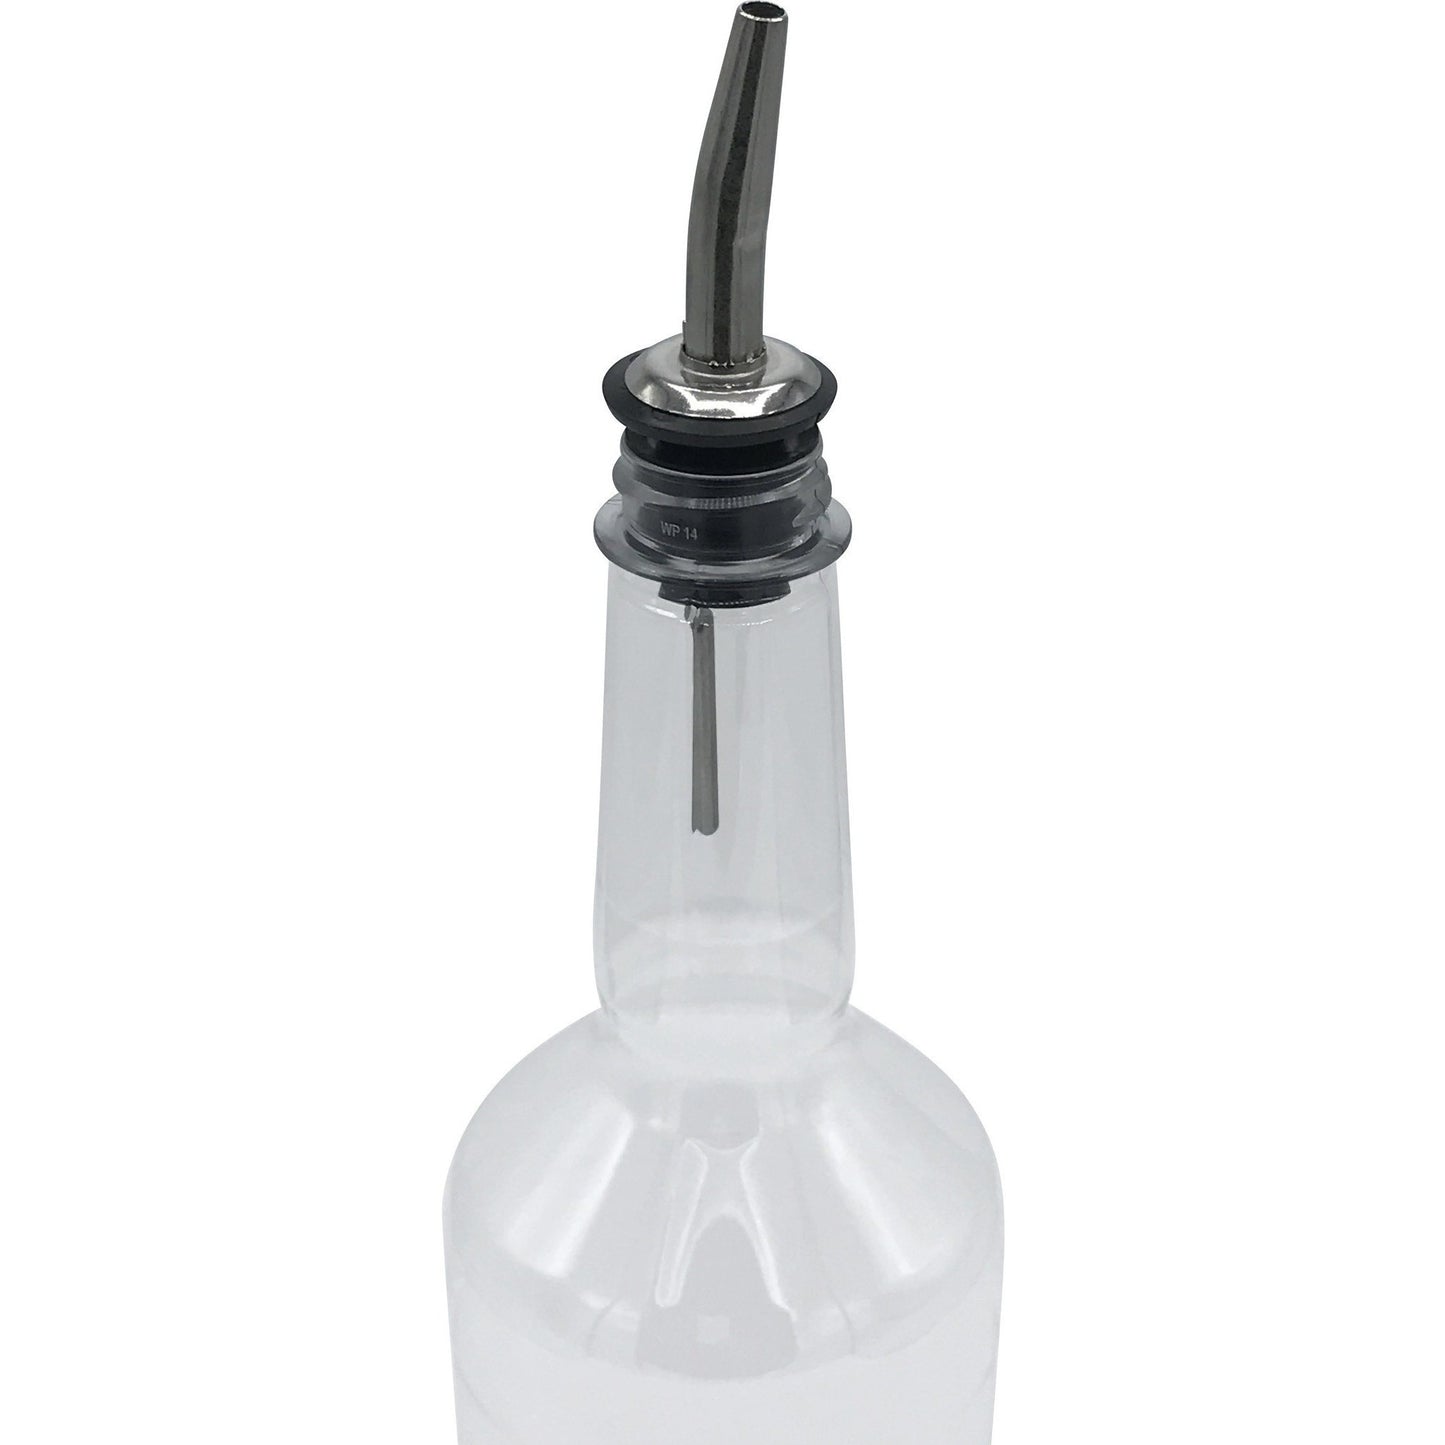 StainlessStainless Steel Pouring Bottle Spout - Icy-Sky.com